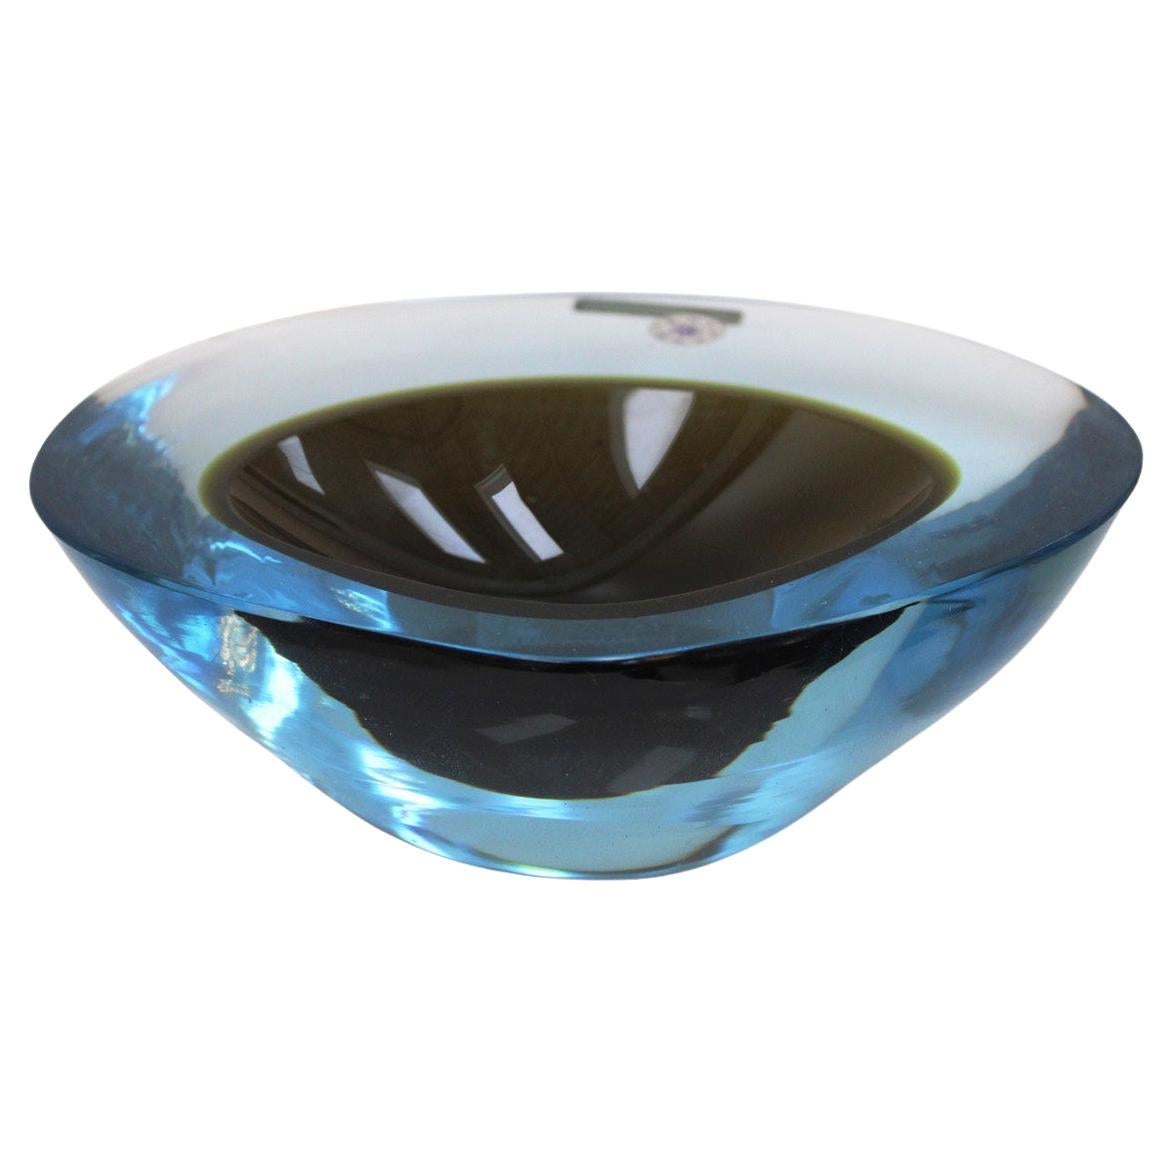 Mid-Century Modern Blue and Black Sommerso Murano Glass Vase by Flavio Poli 1950 For Sale